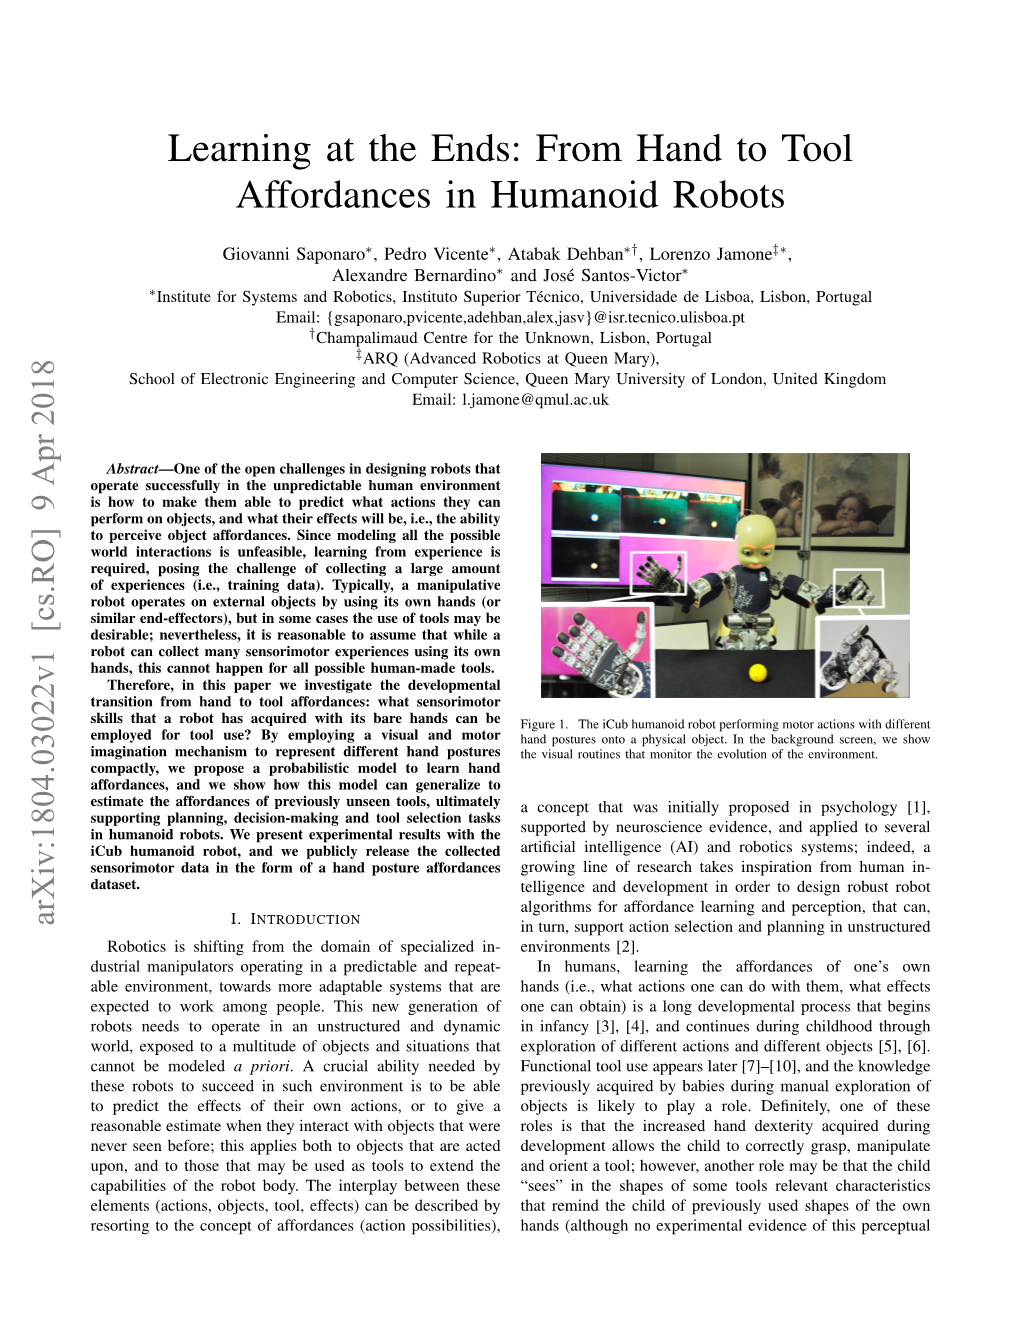 From Hand to Tool Affordances in Humanoid Robots